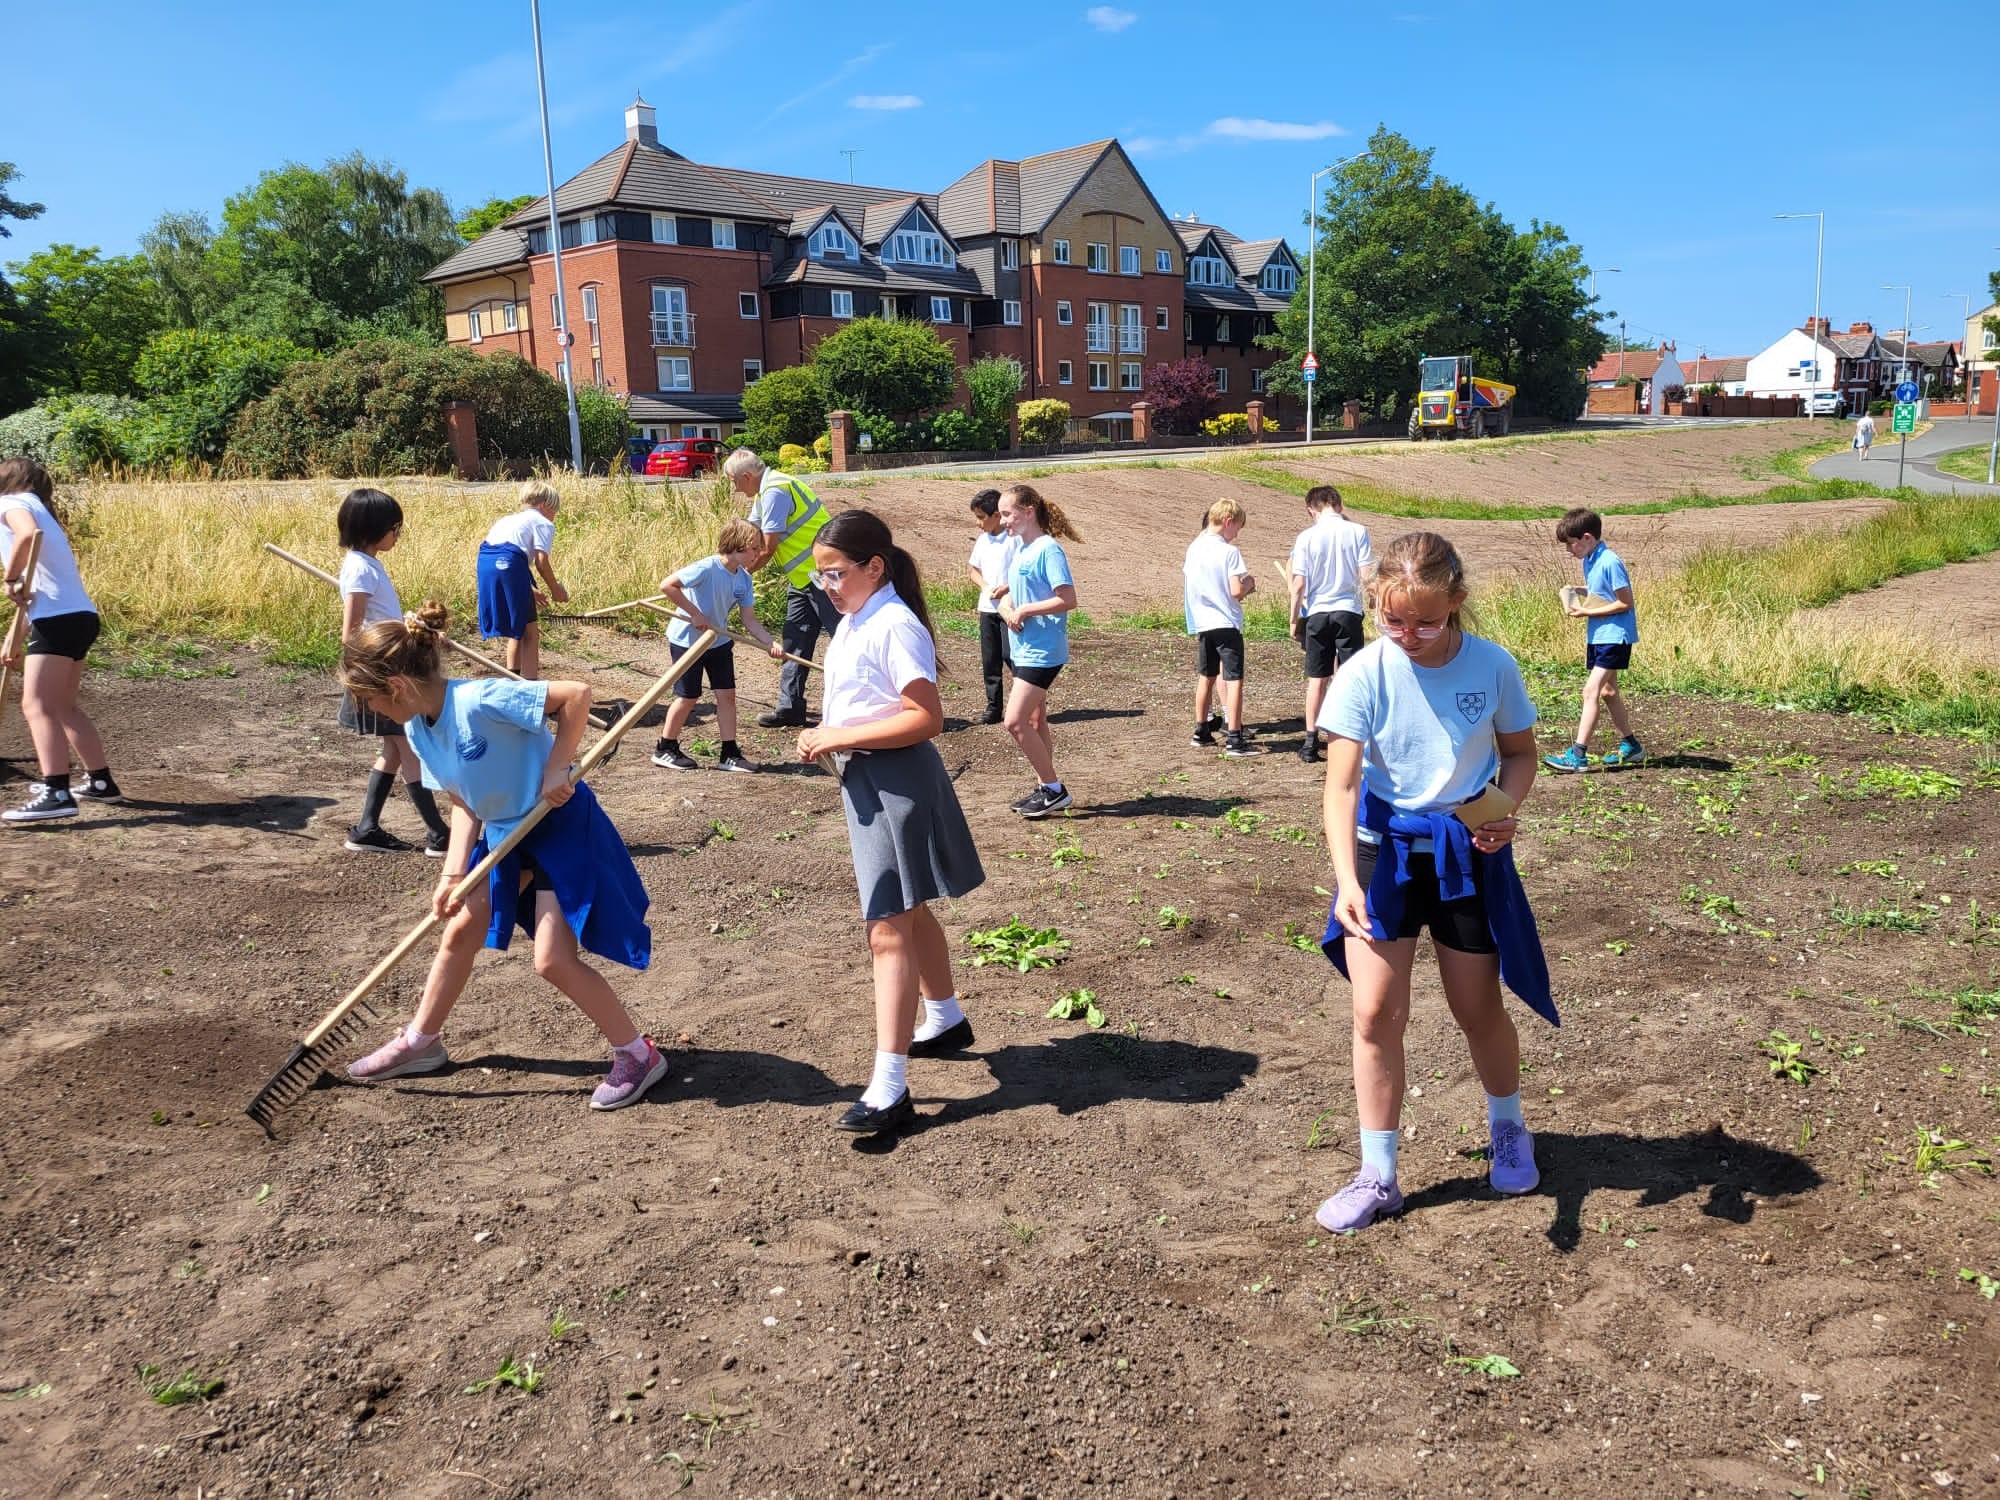 Children from local primary school sowing seeds